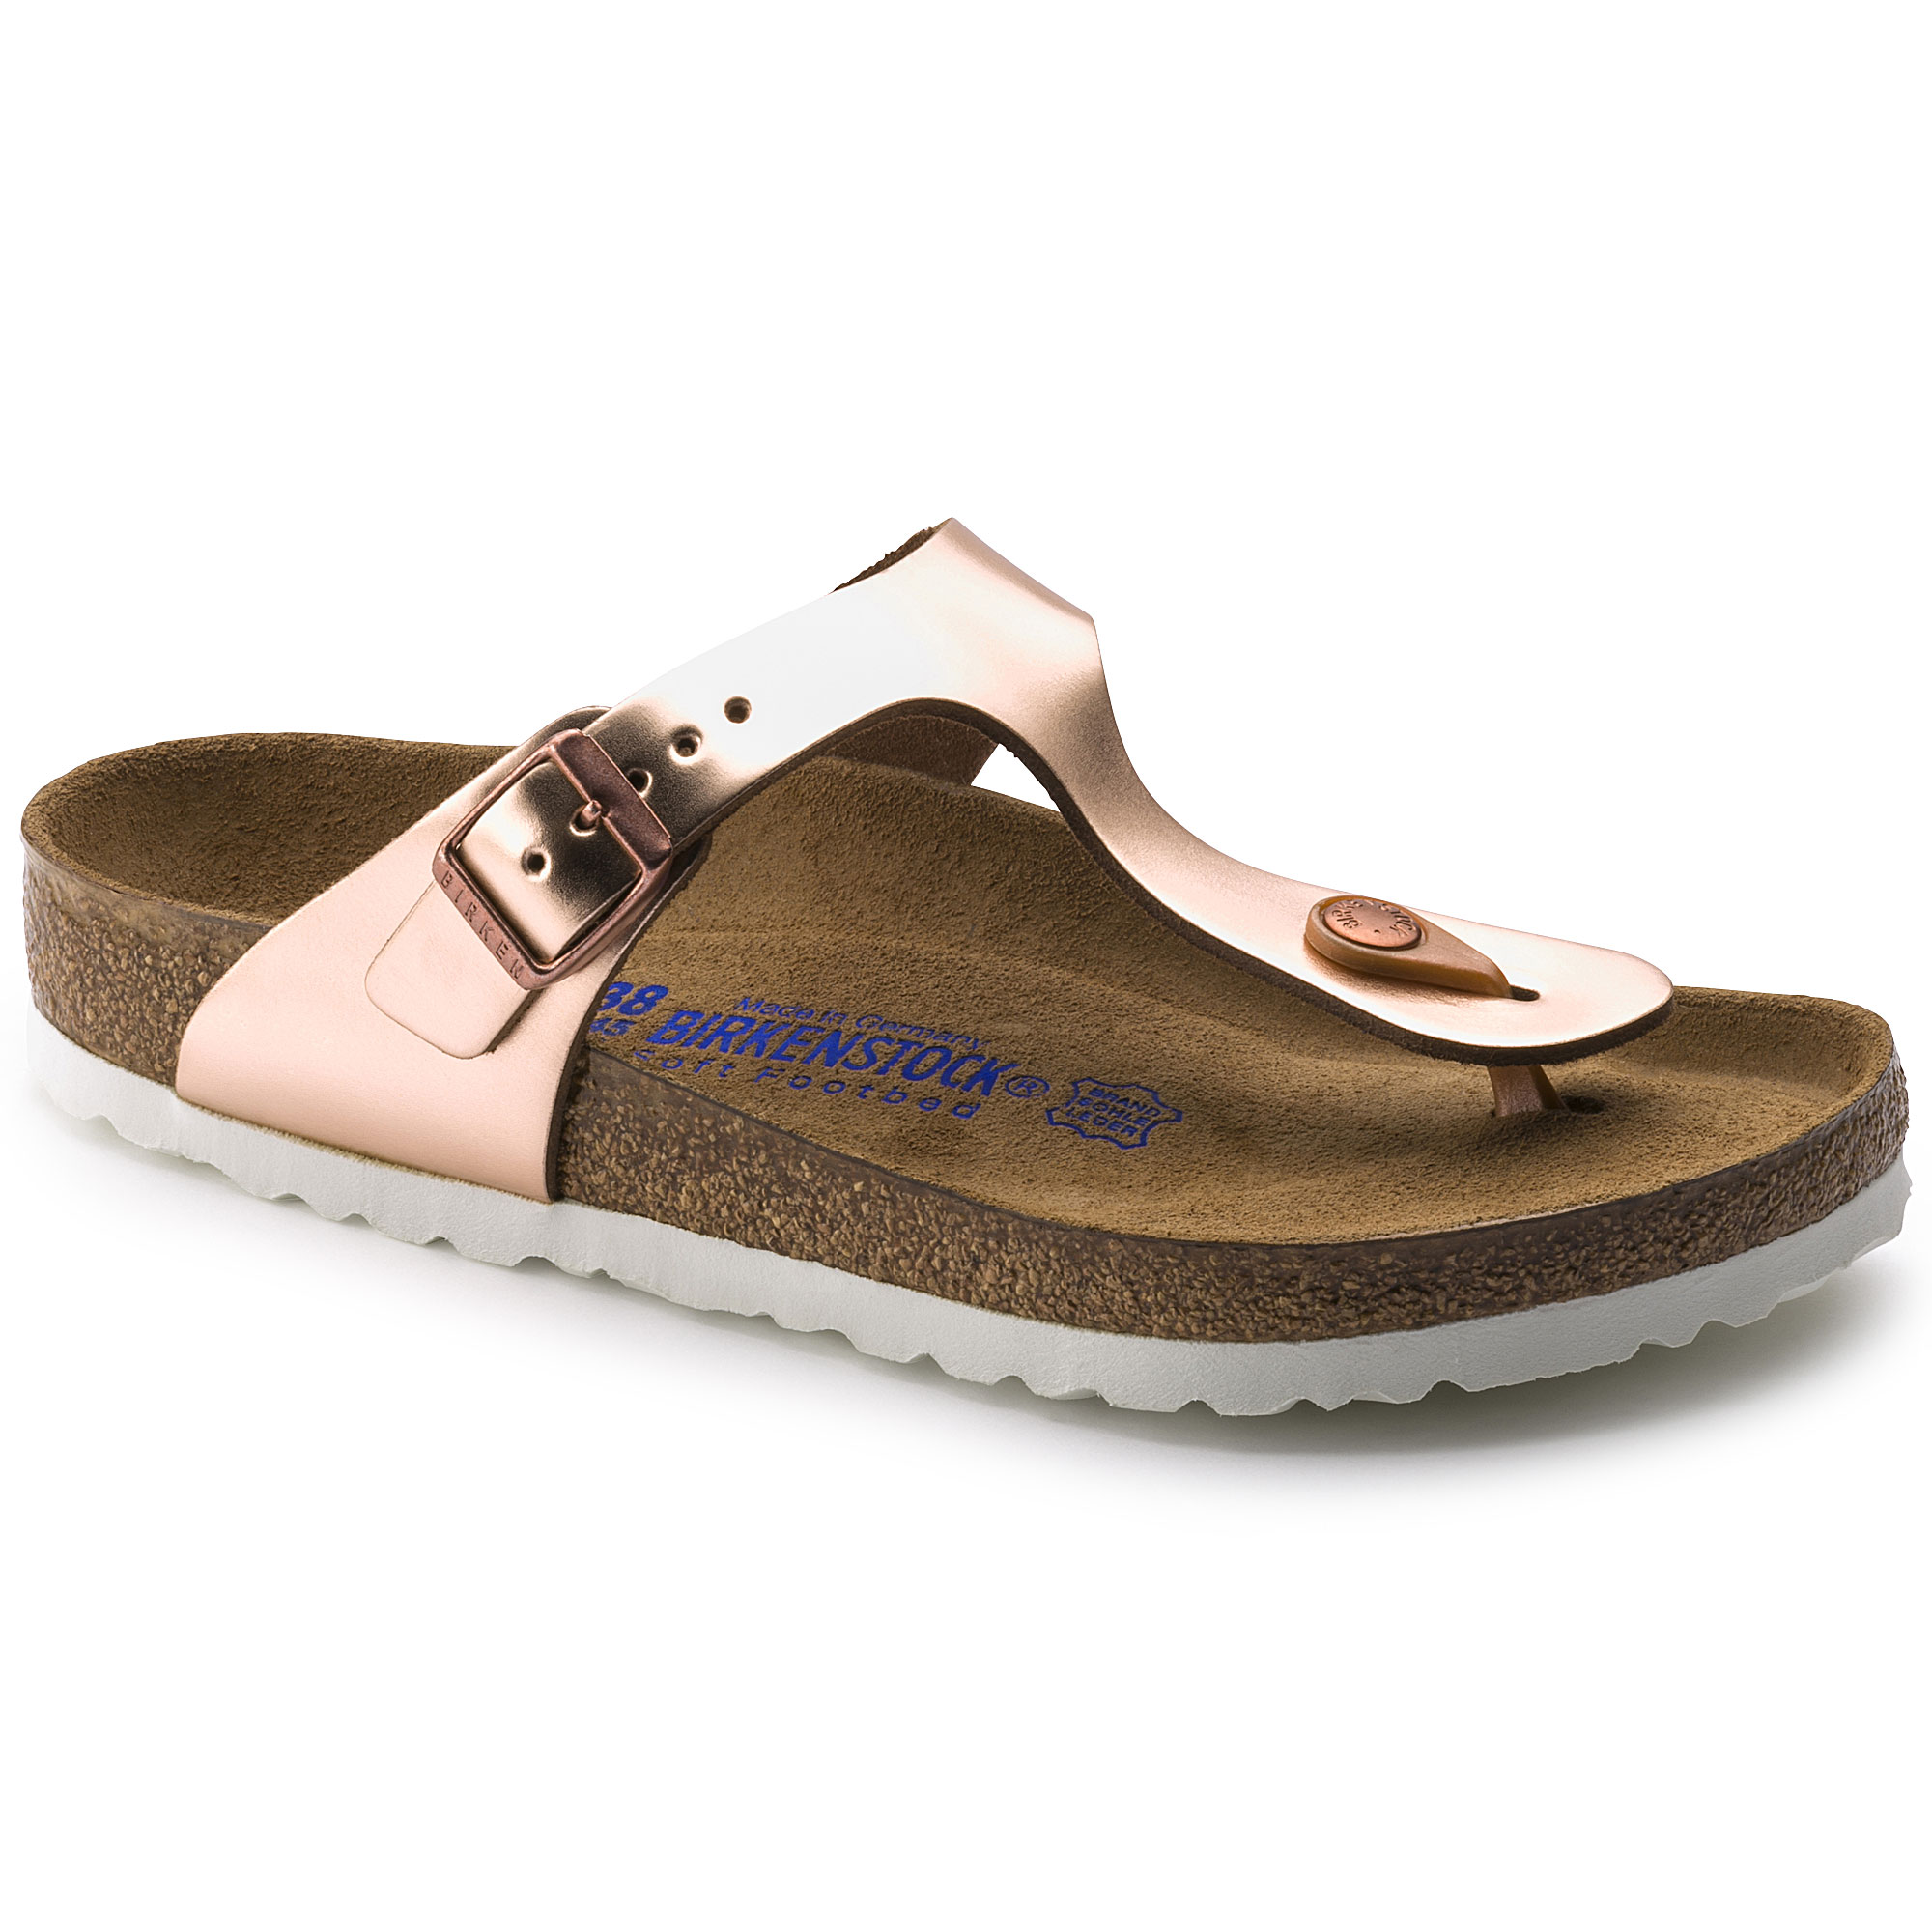 Gizeh Soft Footbed Leather Metallic Copper